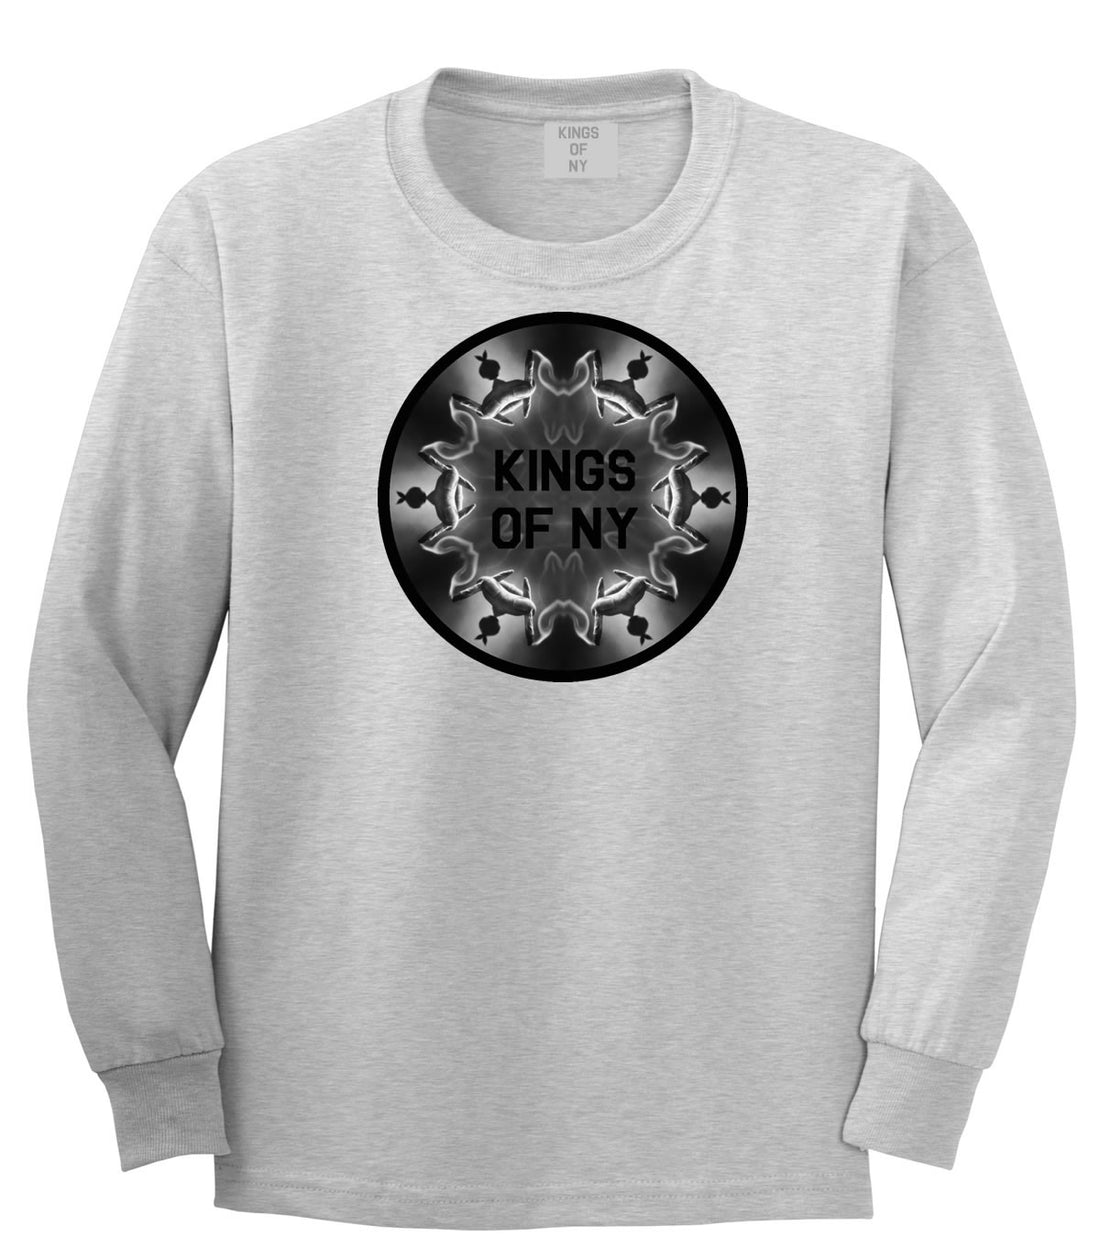 Pass That Blunt Long Sleeve T-Shirt in Grey By Kings Of NY